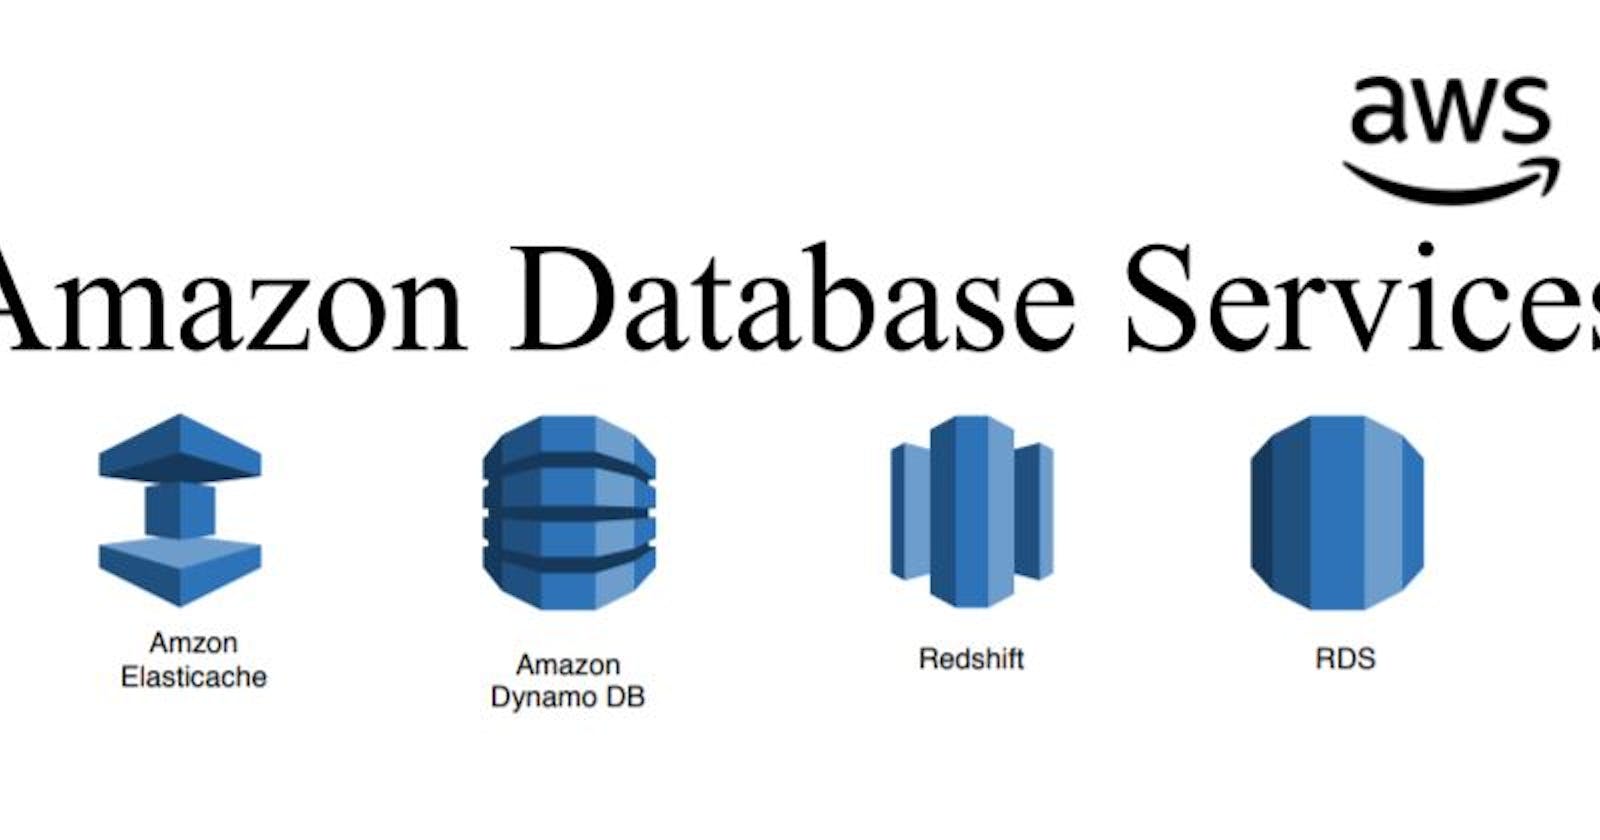 Day 44 Relational Database Service in AWS